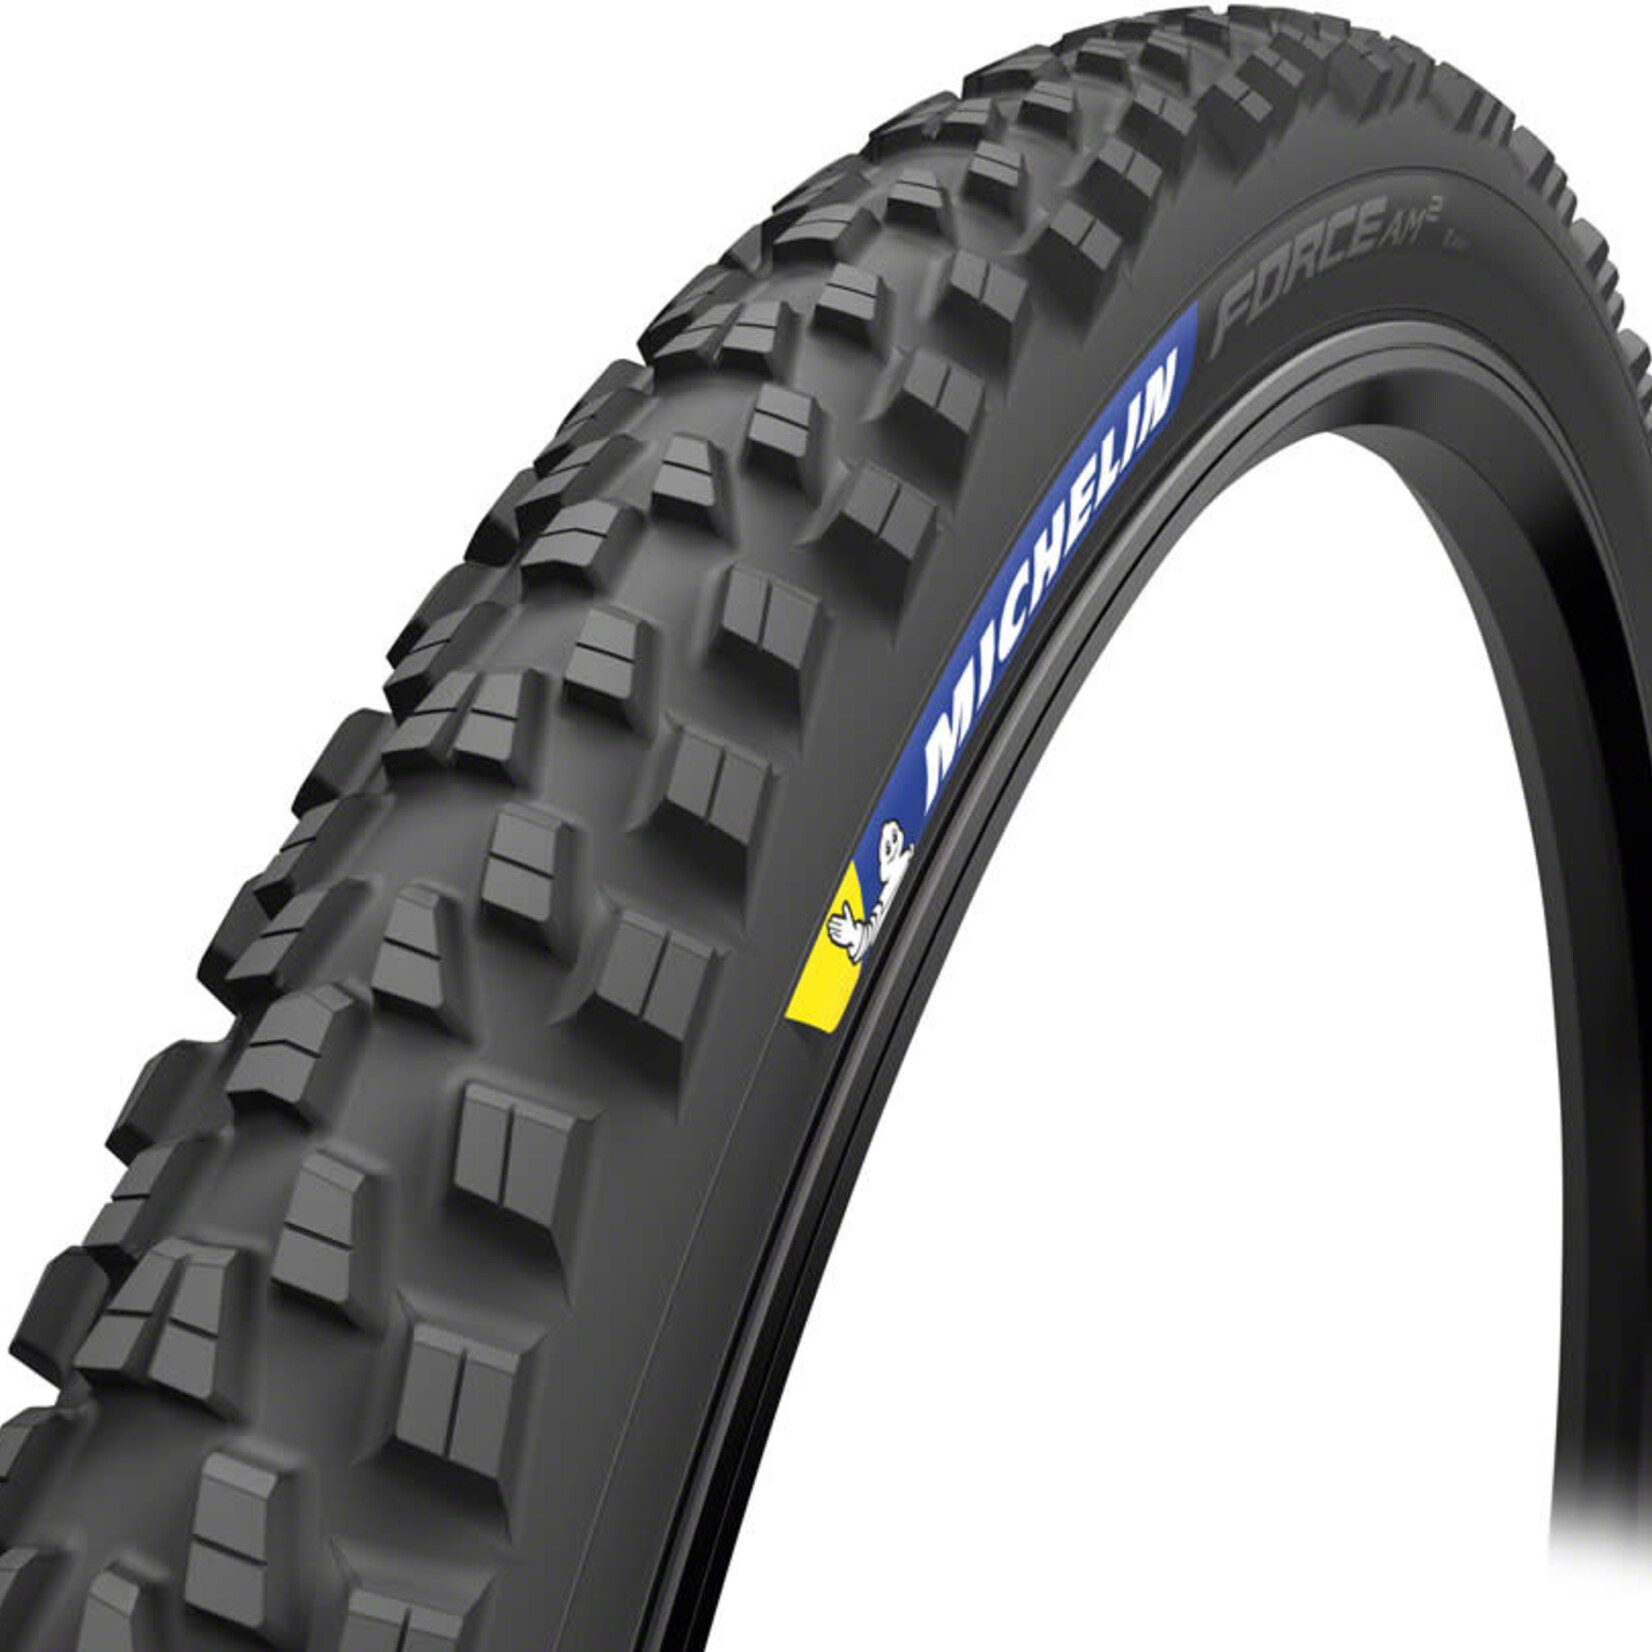 Michelin Michelin Force AM2 Tire - 29 x 2.4, Tubeless, Folding, Black, Competition